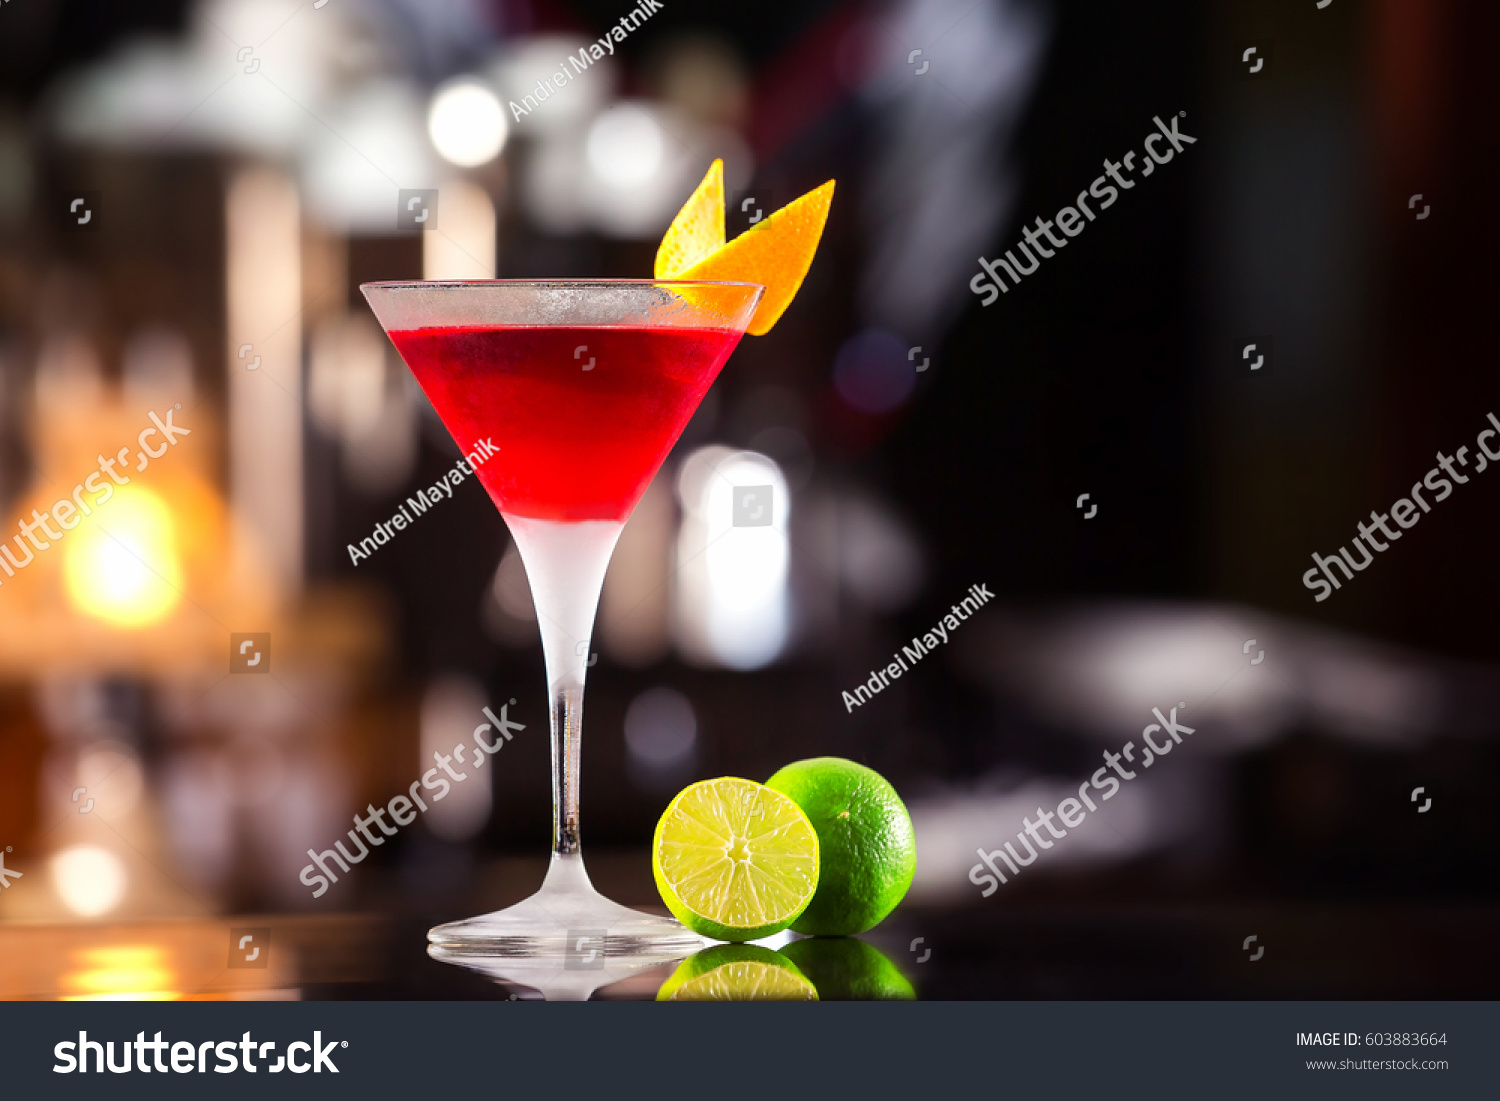 Closeup glass of cosmopolitan cocktail decorated with orange at bar background. #603883664